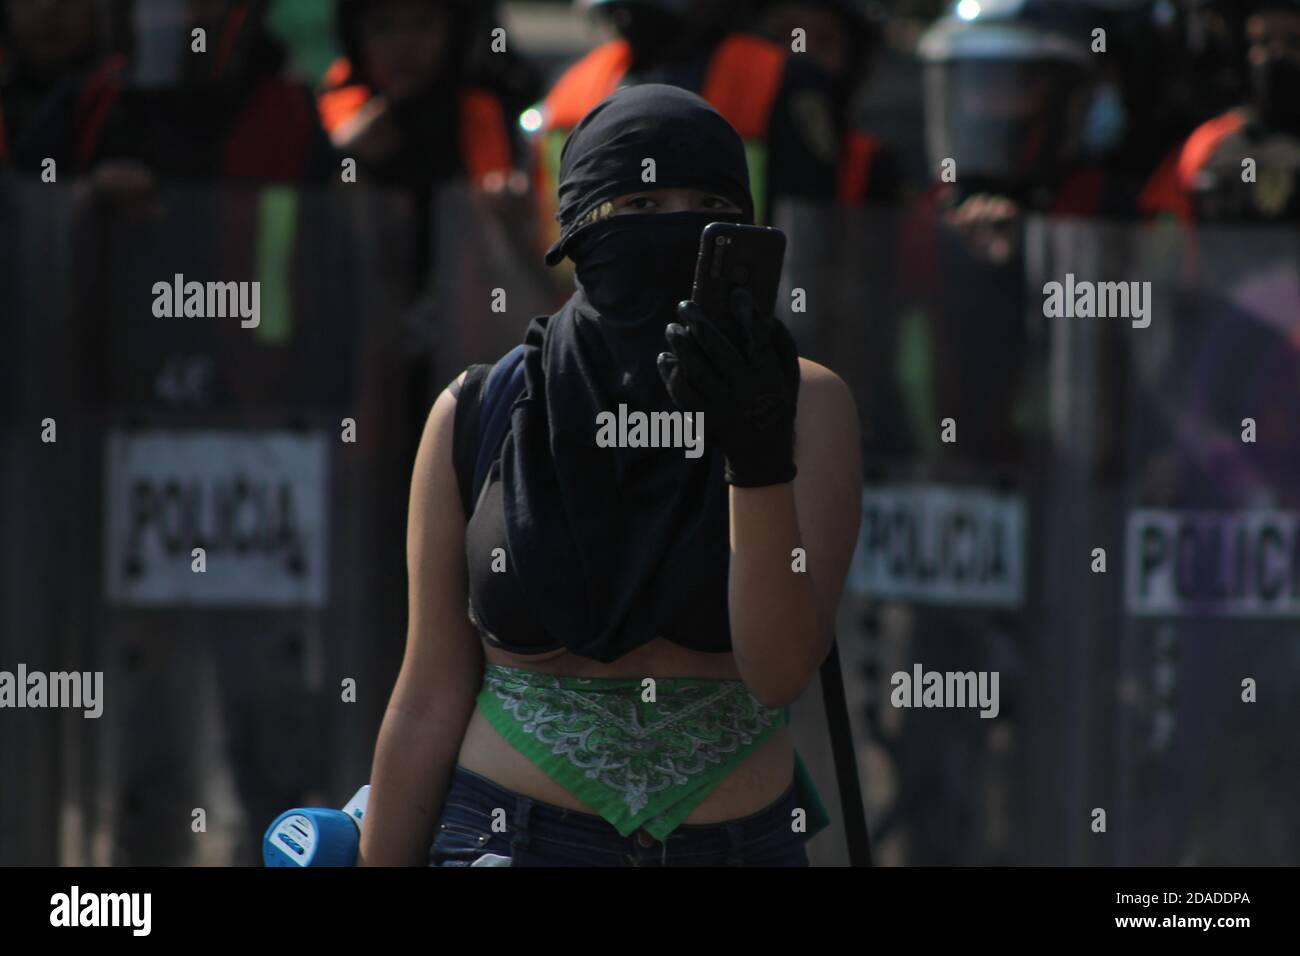 Mexico City, Mexico. 11th Nov, 2020. MEXICO CITY, MEXICO - NOVEMBER 11: A Woman takes part during a demonstration to demand justice for the Femicide of Bianca Alejandrina 'Alexis' in Cancun on November 11, 2020 in Mexico City, Mexico Credit: The Photo Access/Alamy Live News Stock Photo